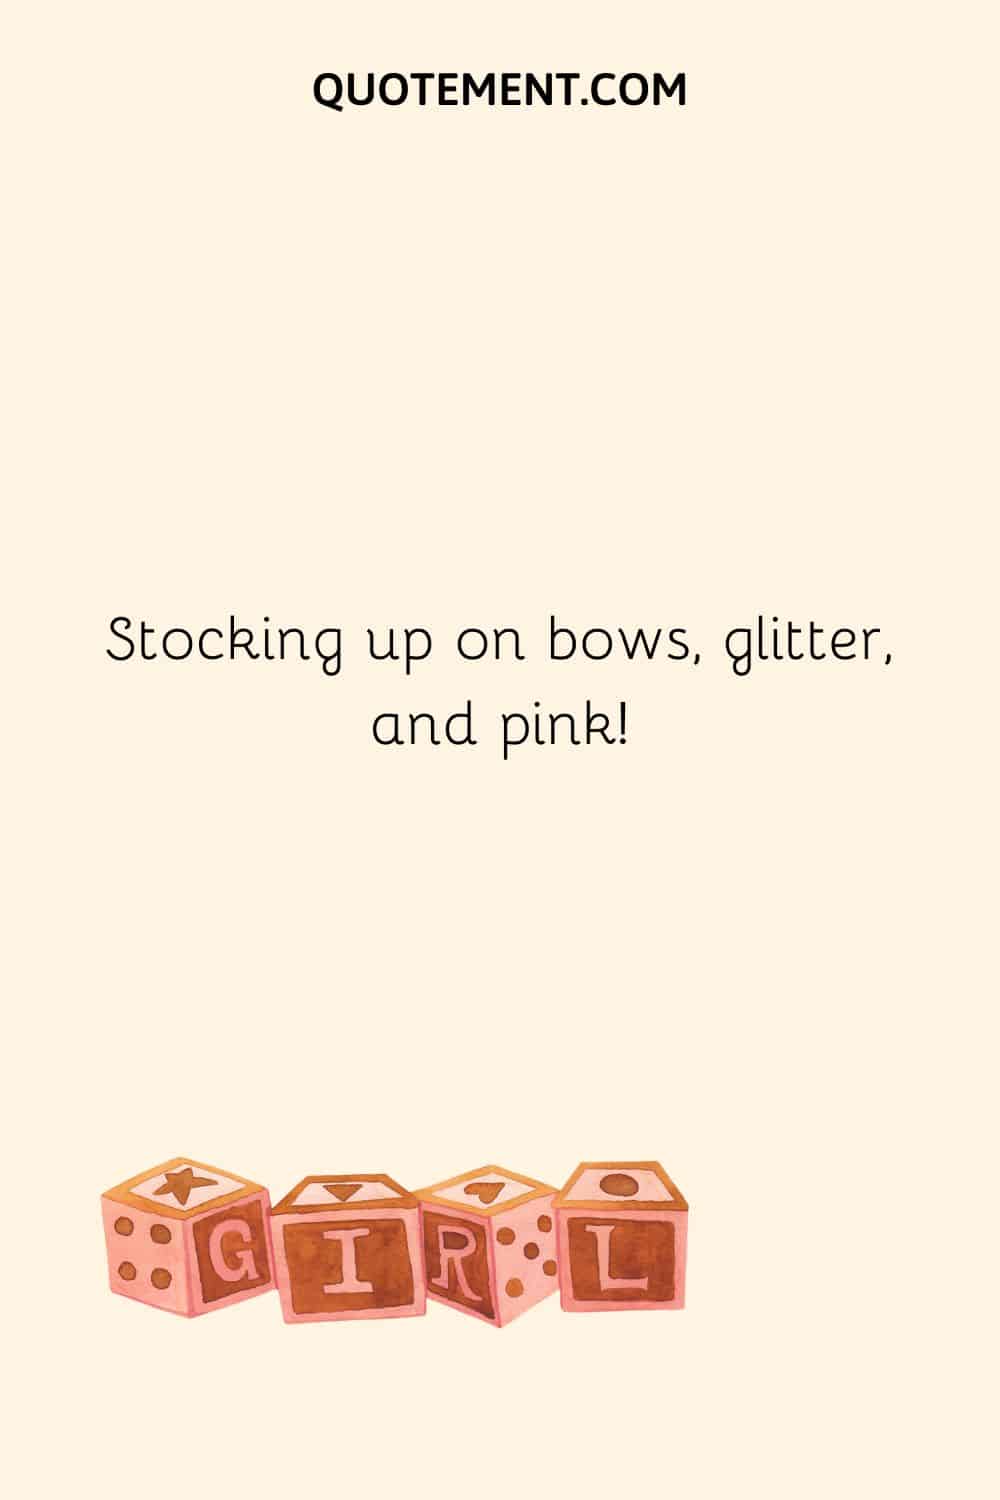 Stocking up on bows, glitter, and pink